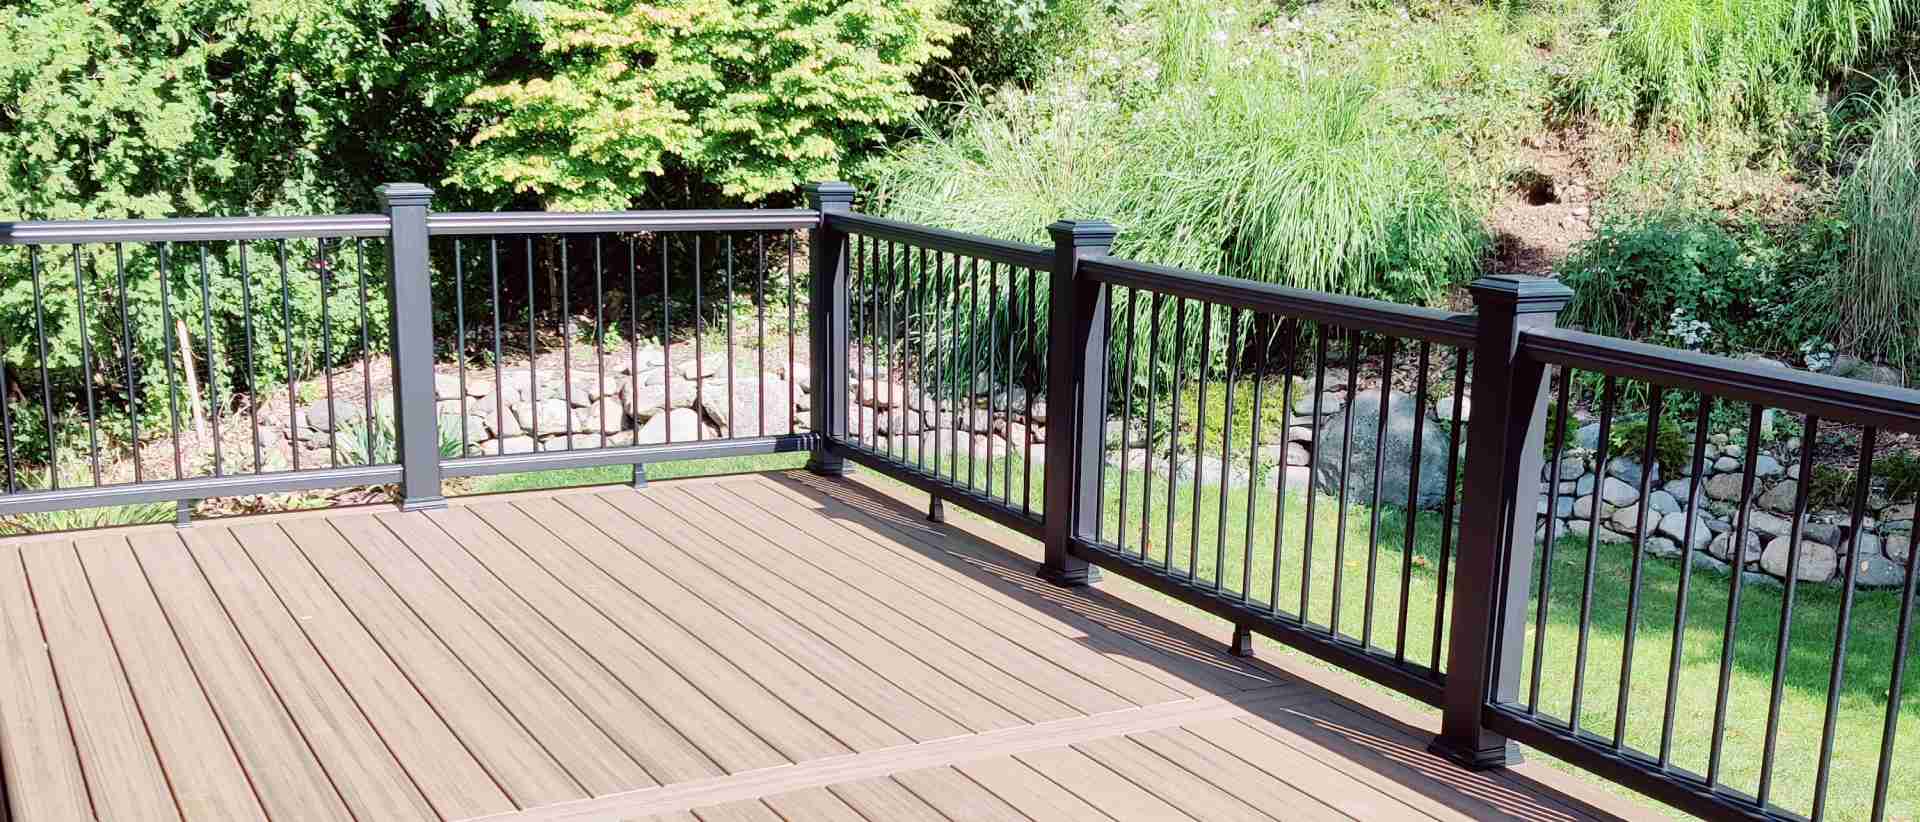 A full deck rebuild by True Built Construction features a spacious, multi-tier design with luxurious walnut-colored composite planks and contrasting black aluminum balusters, all set against the serene backdrop of a dense, leafy forest